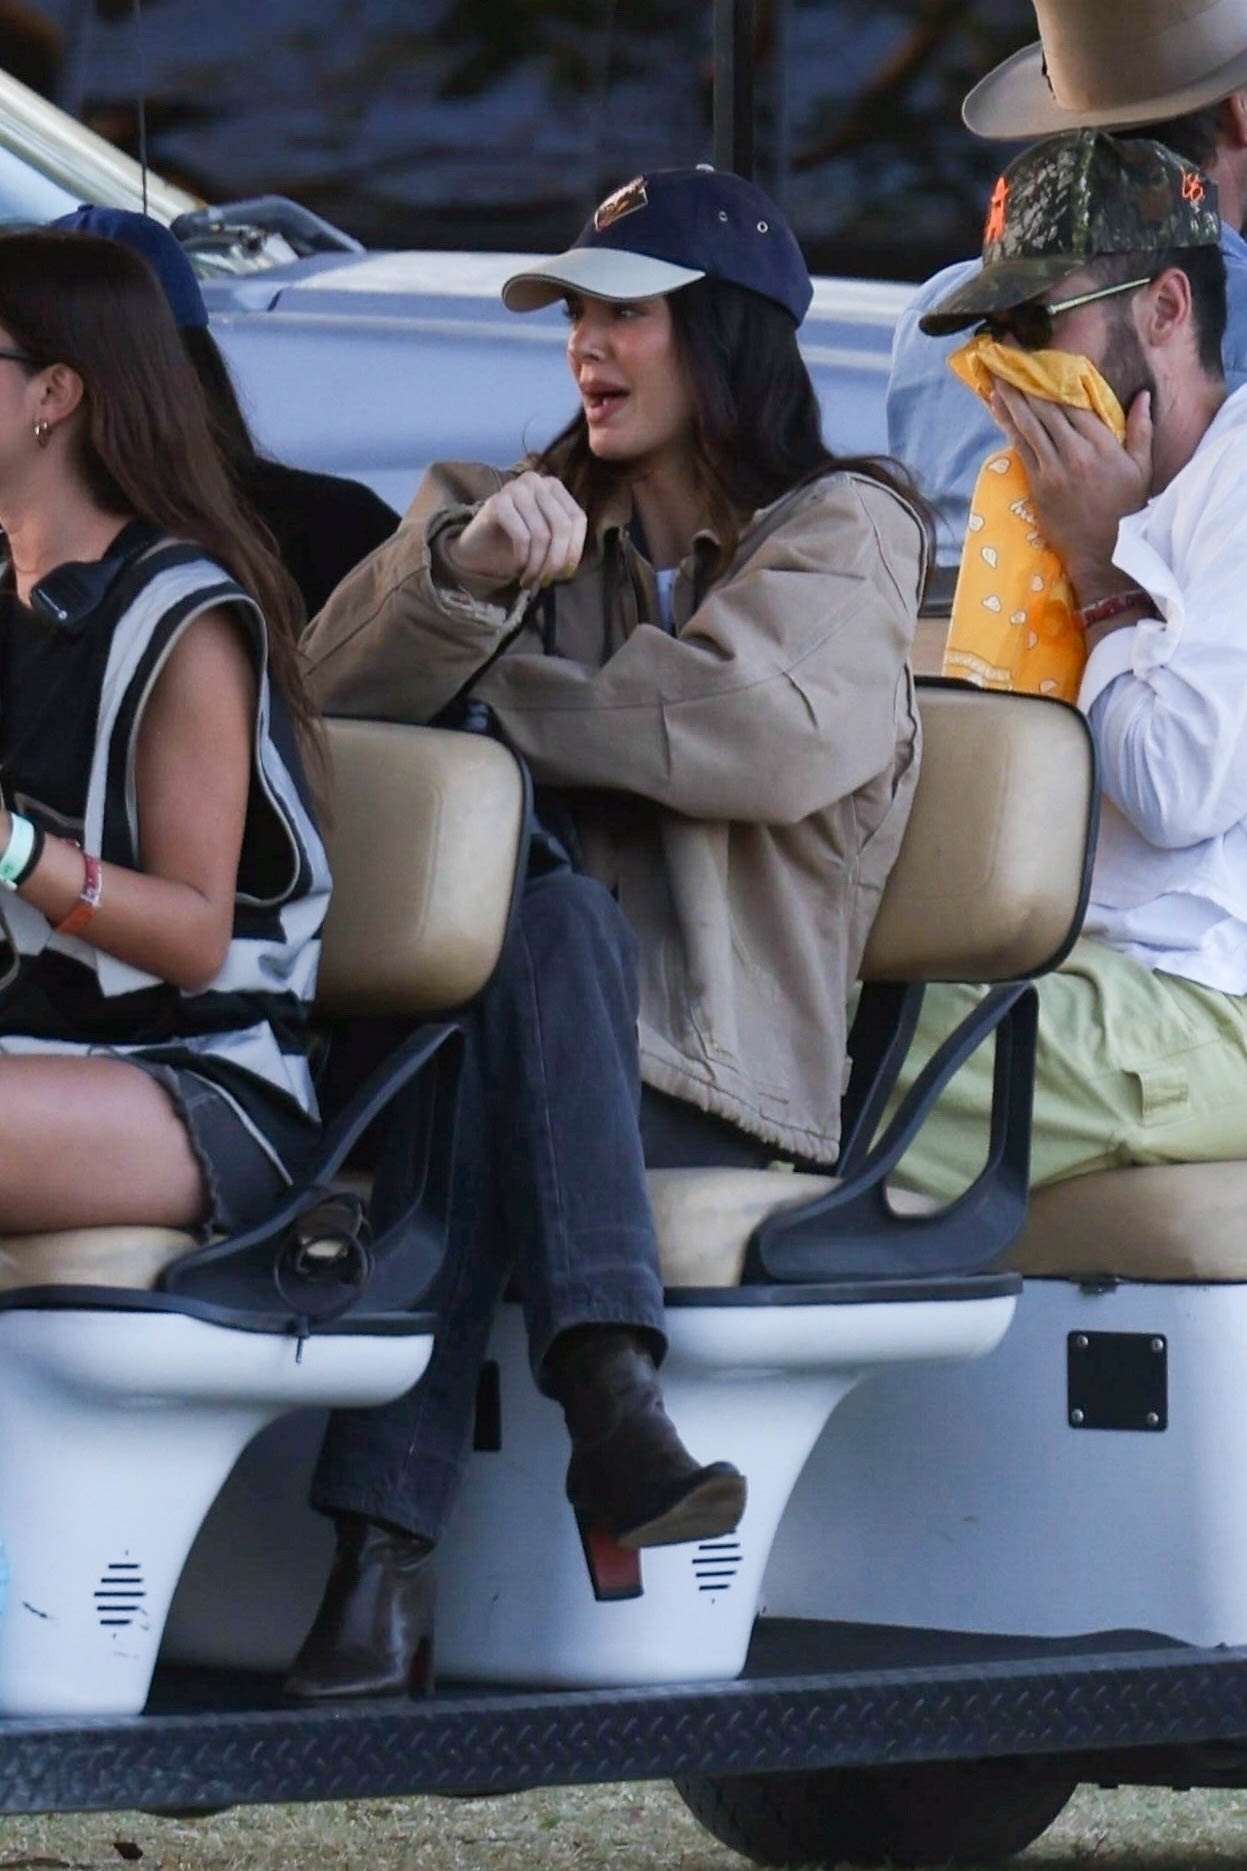 Kendall's face appeared a little puffy in the paparazzi photos, and her lips seemed extra full